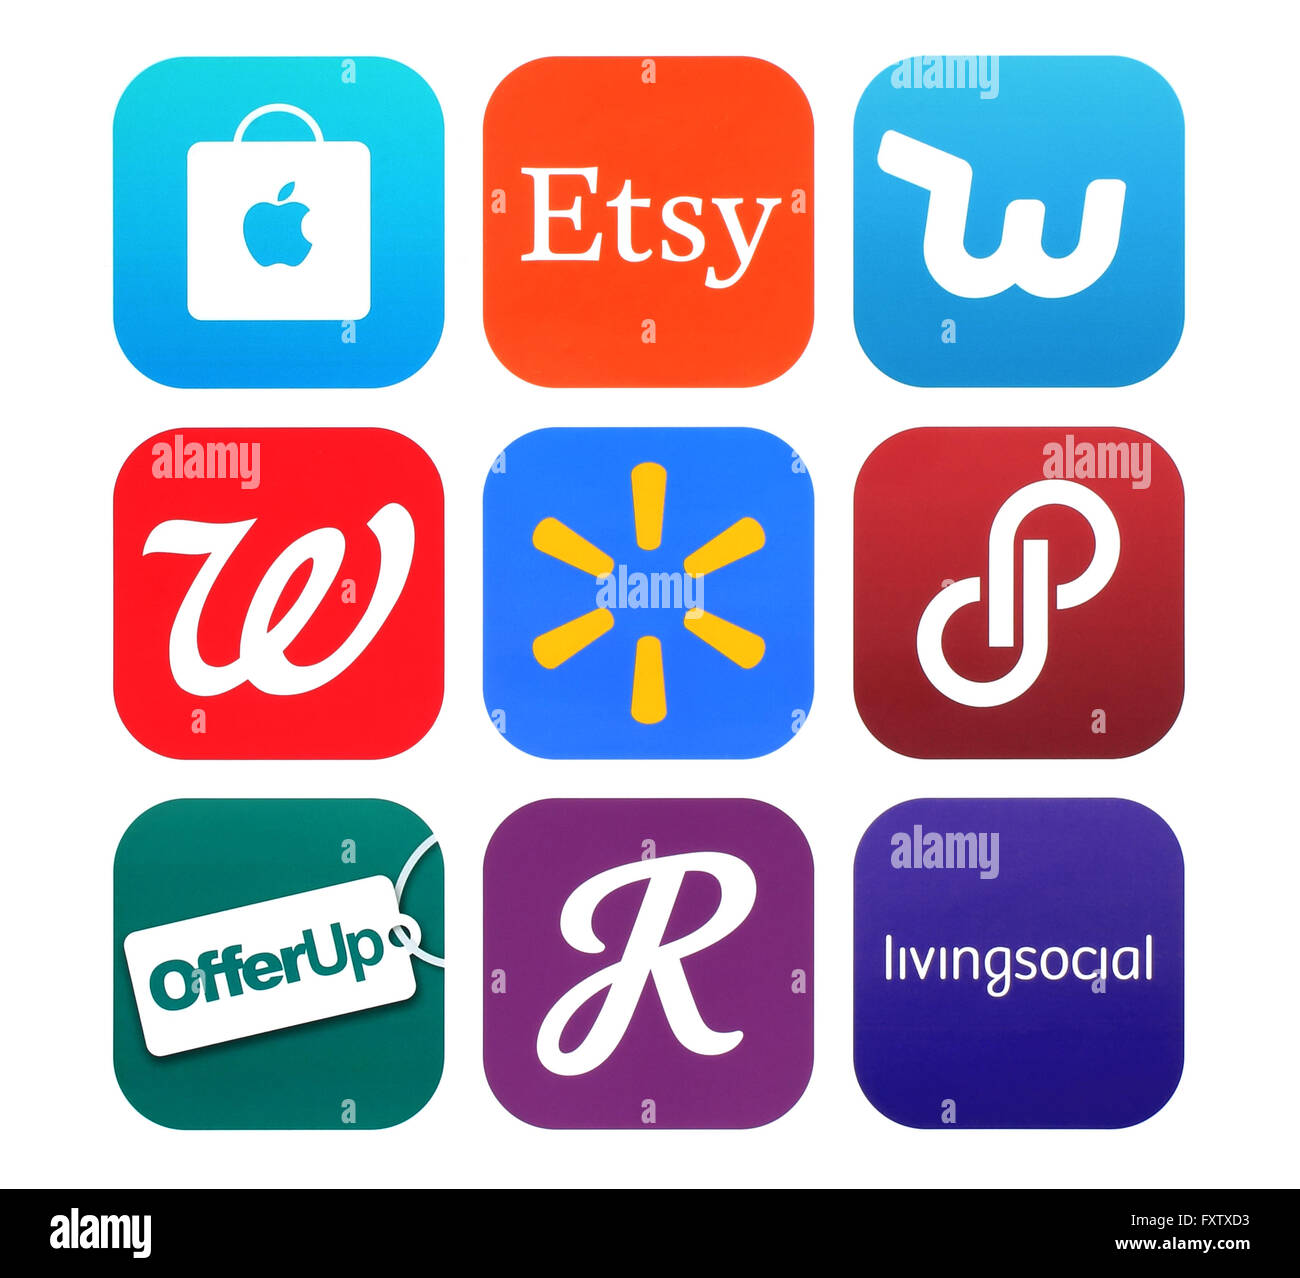 Kiev, Ukraine - February 22, 2016: Collection of popular shopping icons printed on paper: Apple Store, Etsy, Livingsocial Stock Photo